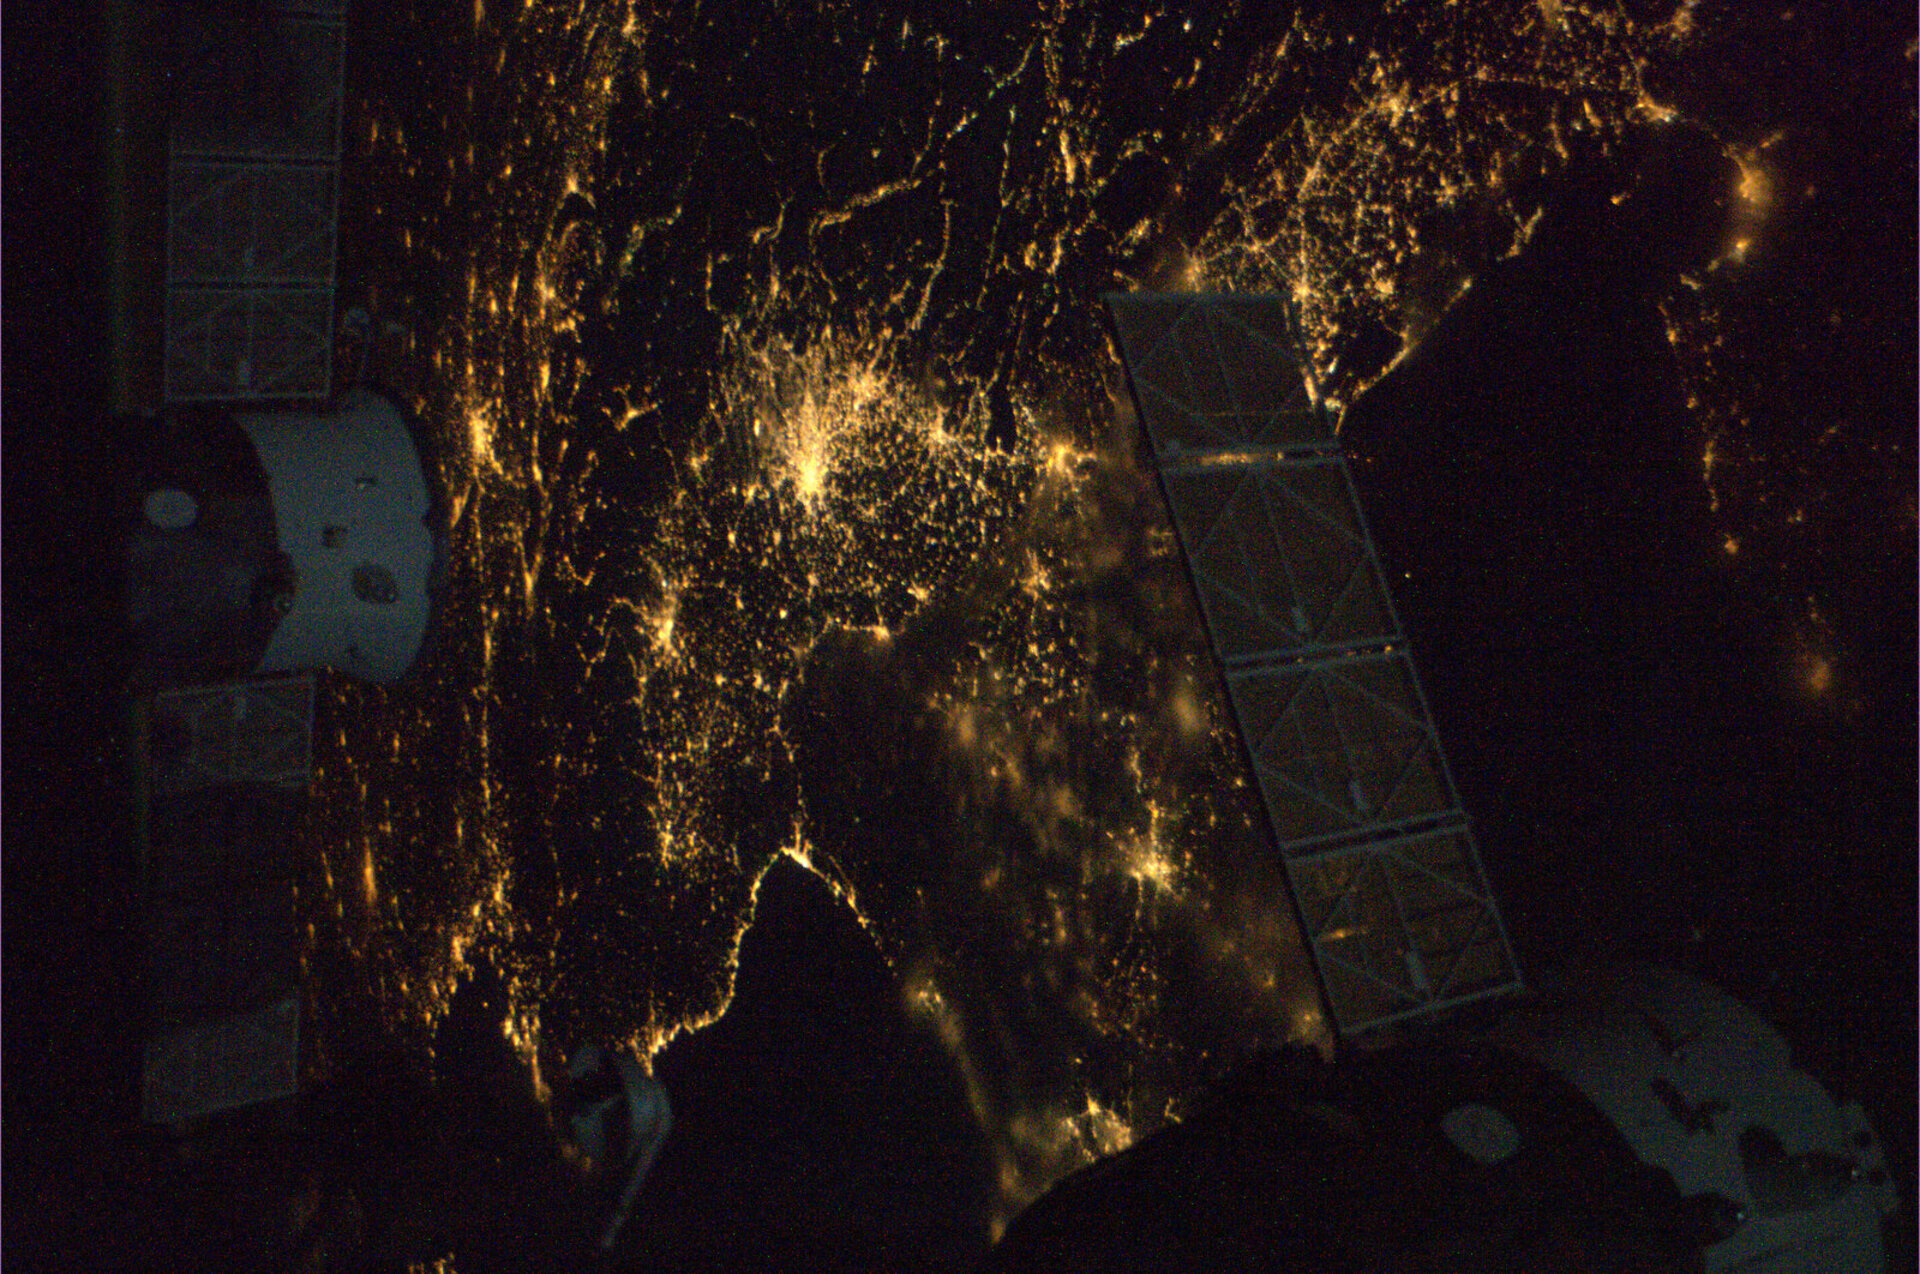 Northern Italy as seen from ISS